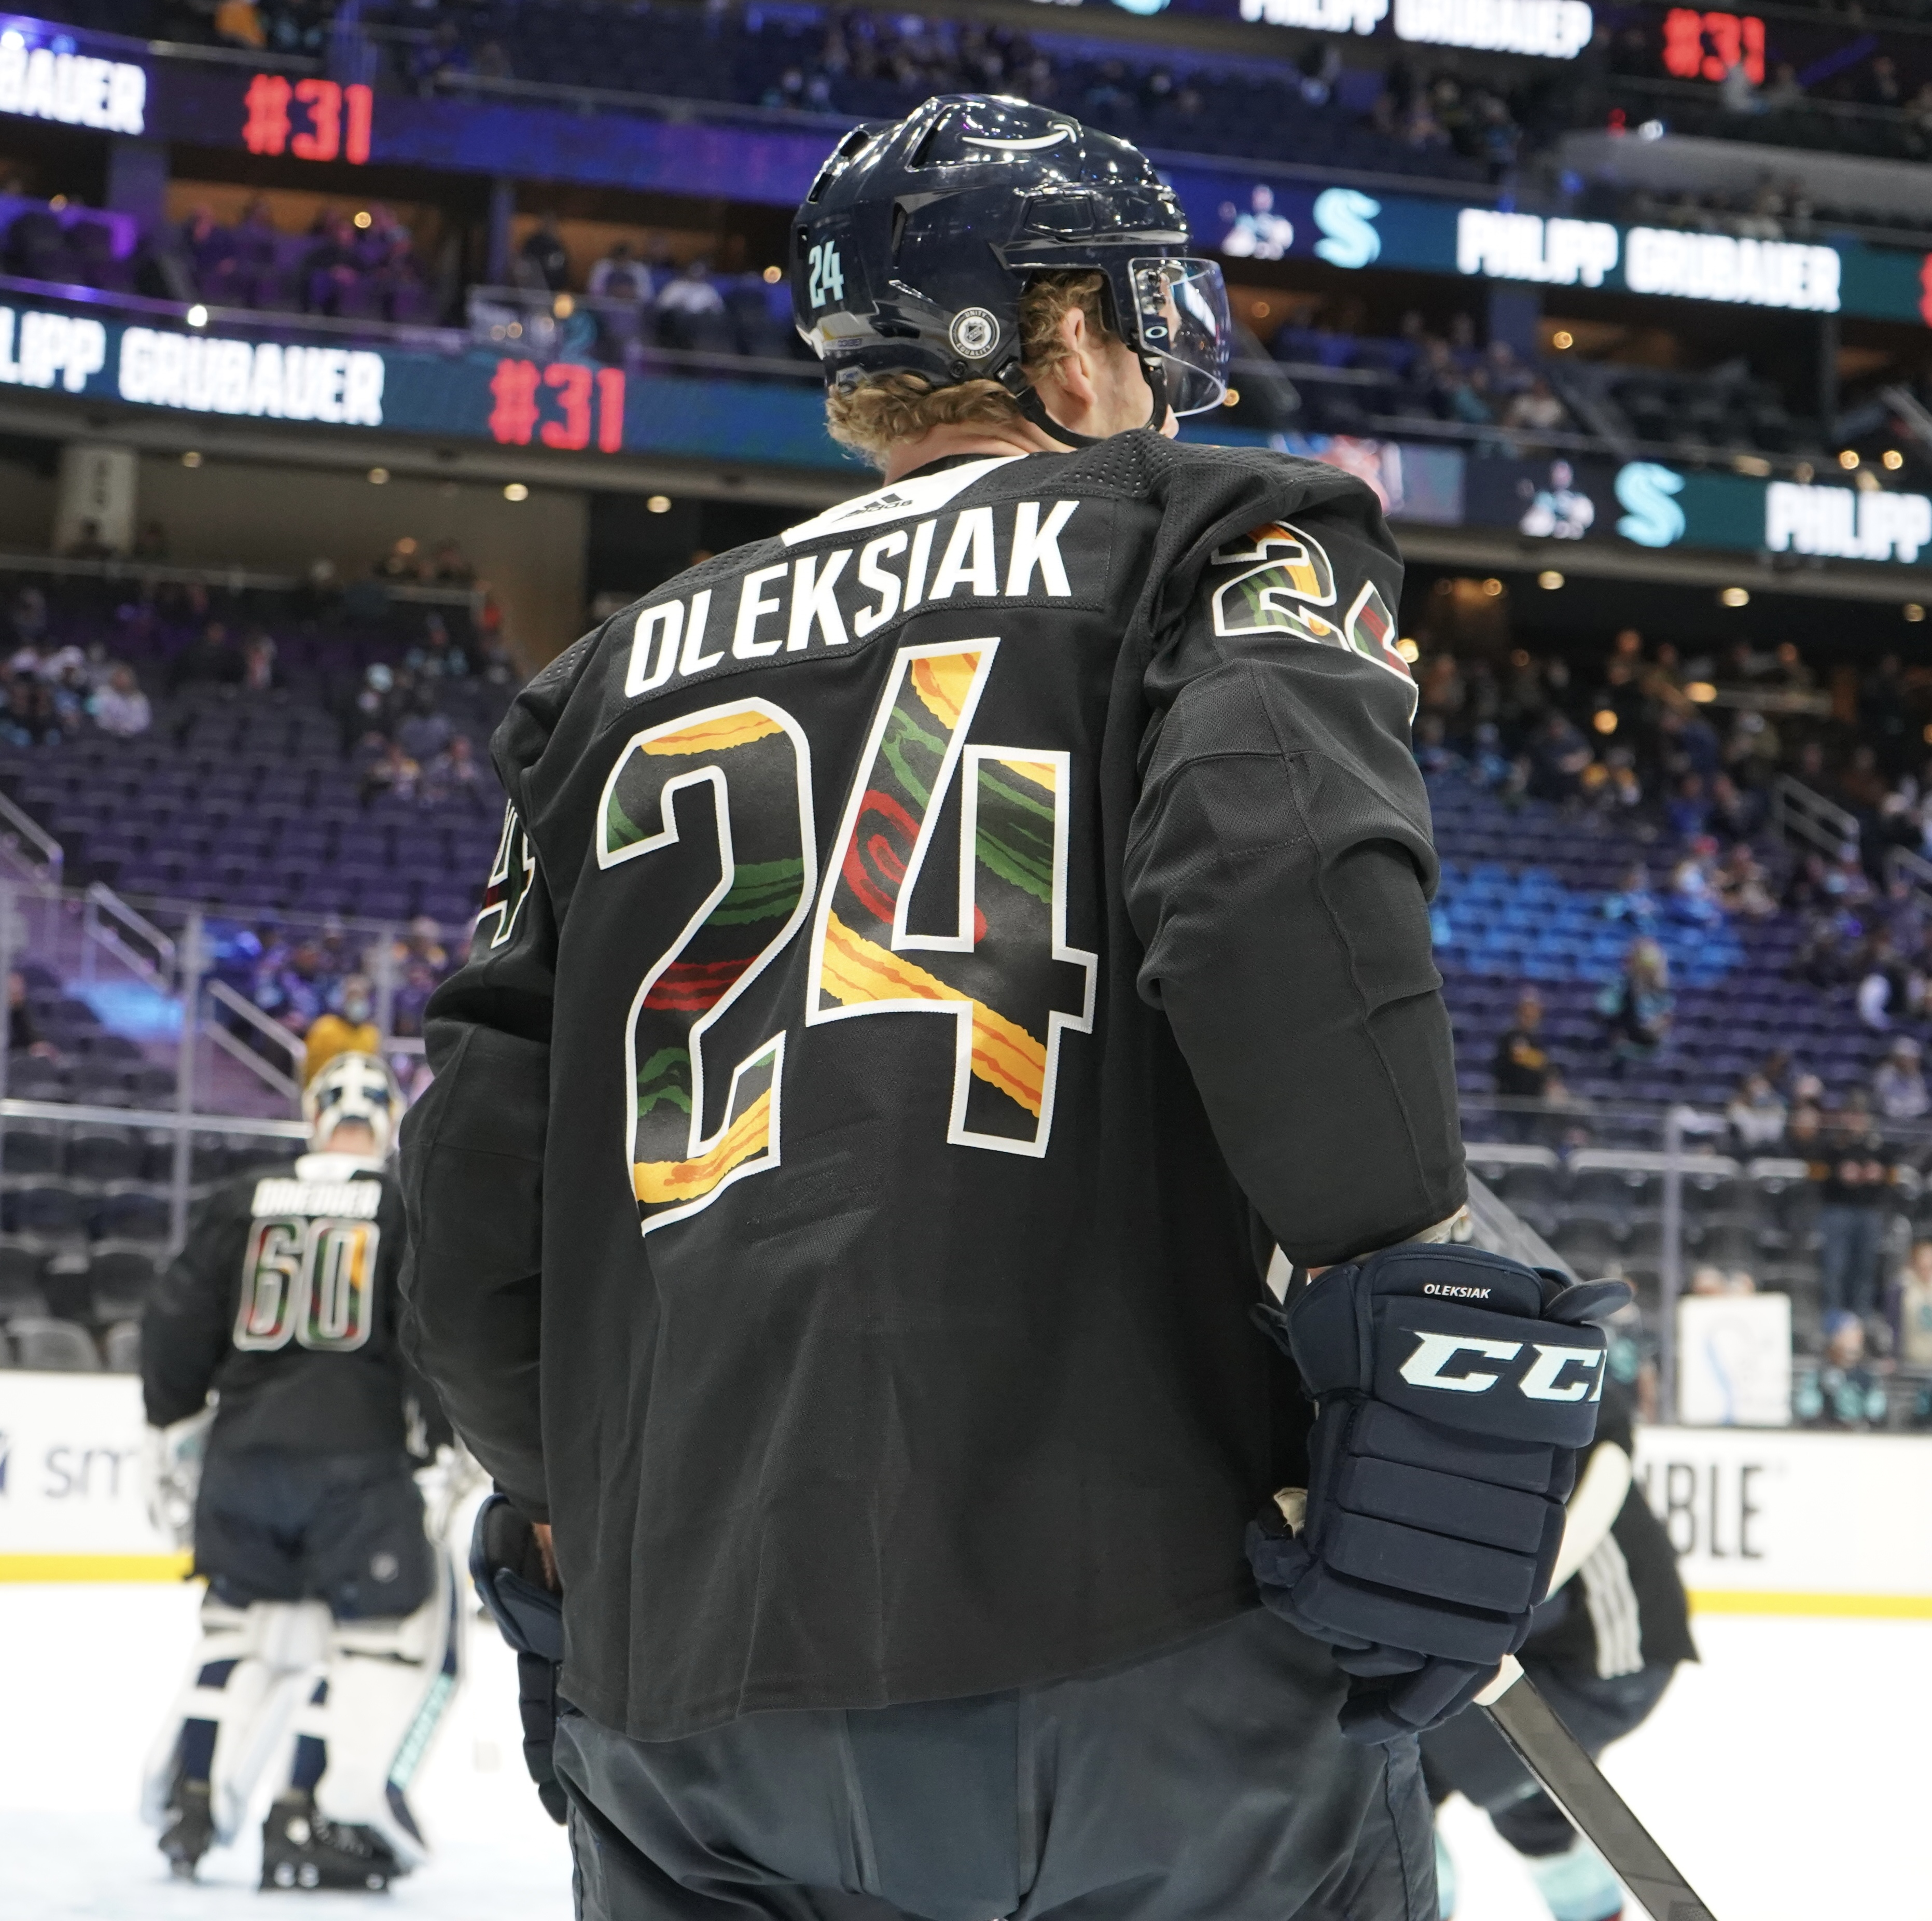 NHL on X: During warmups, the @SeattleKraken wore special jerseys